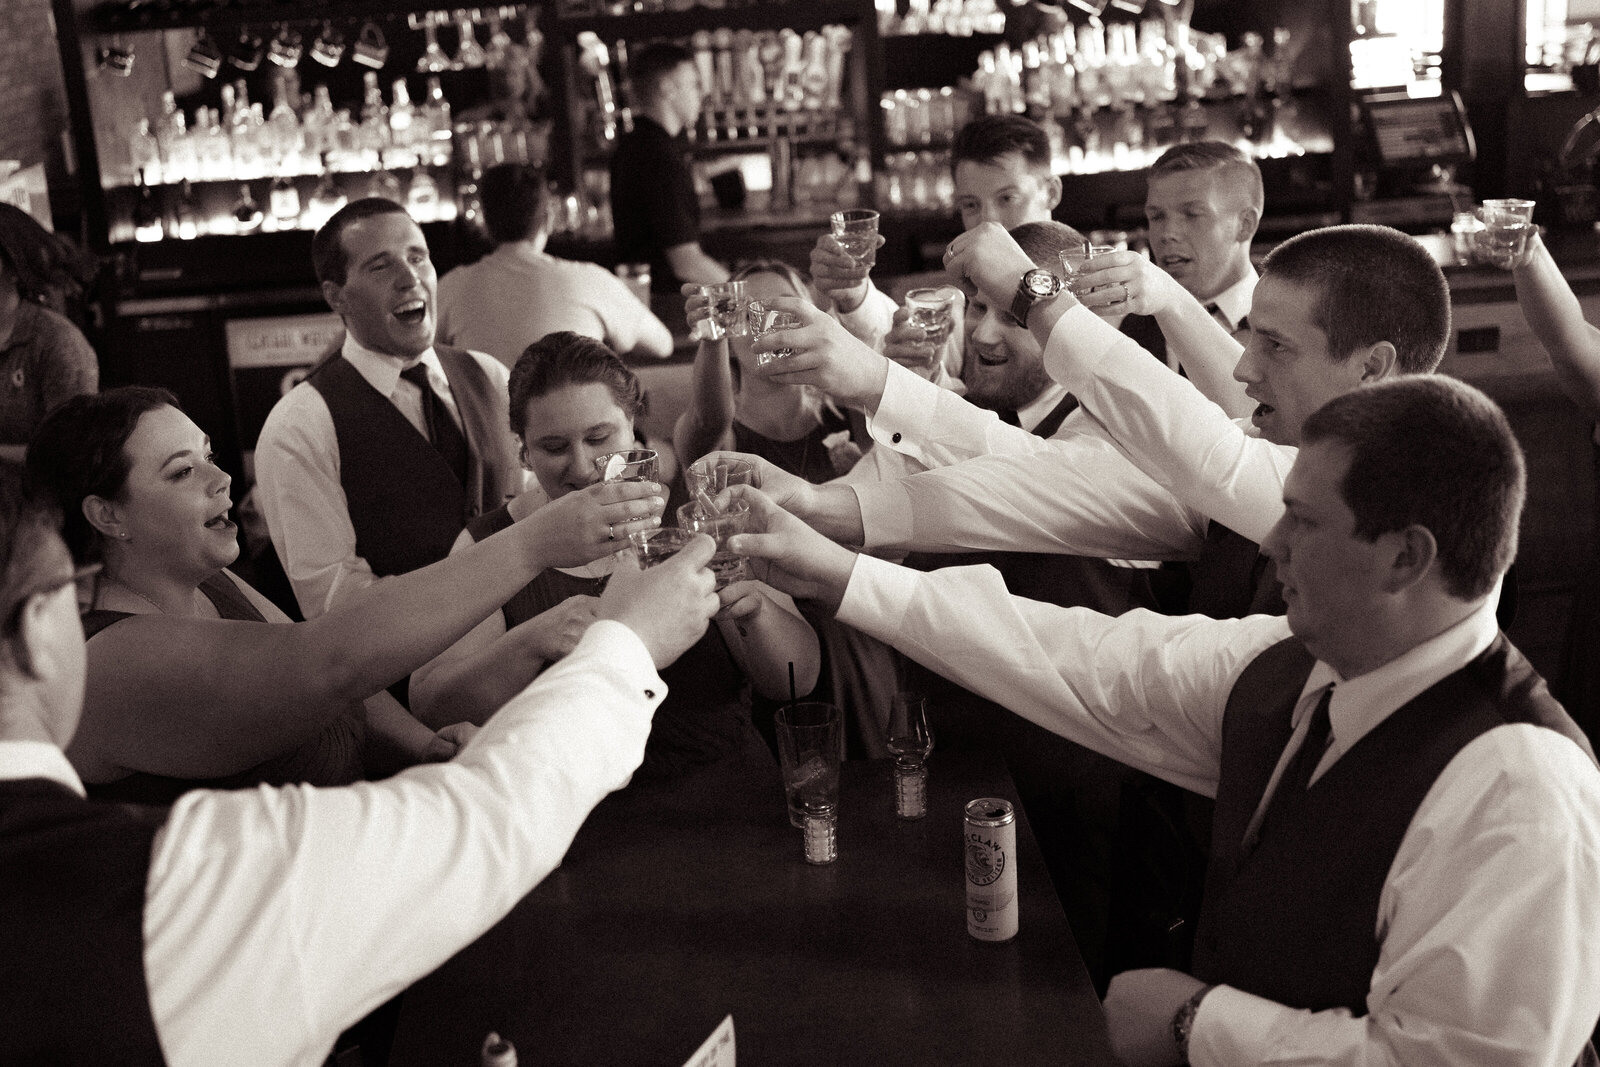 bridal party takes a shot of top shelf tequila to celebrate